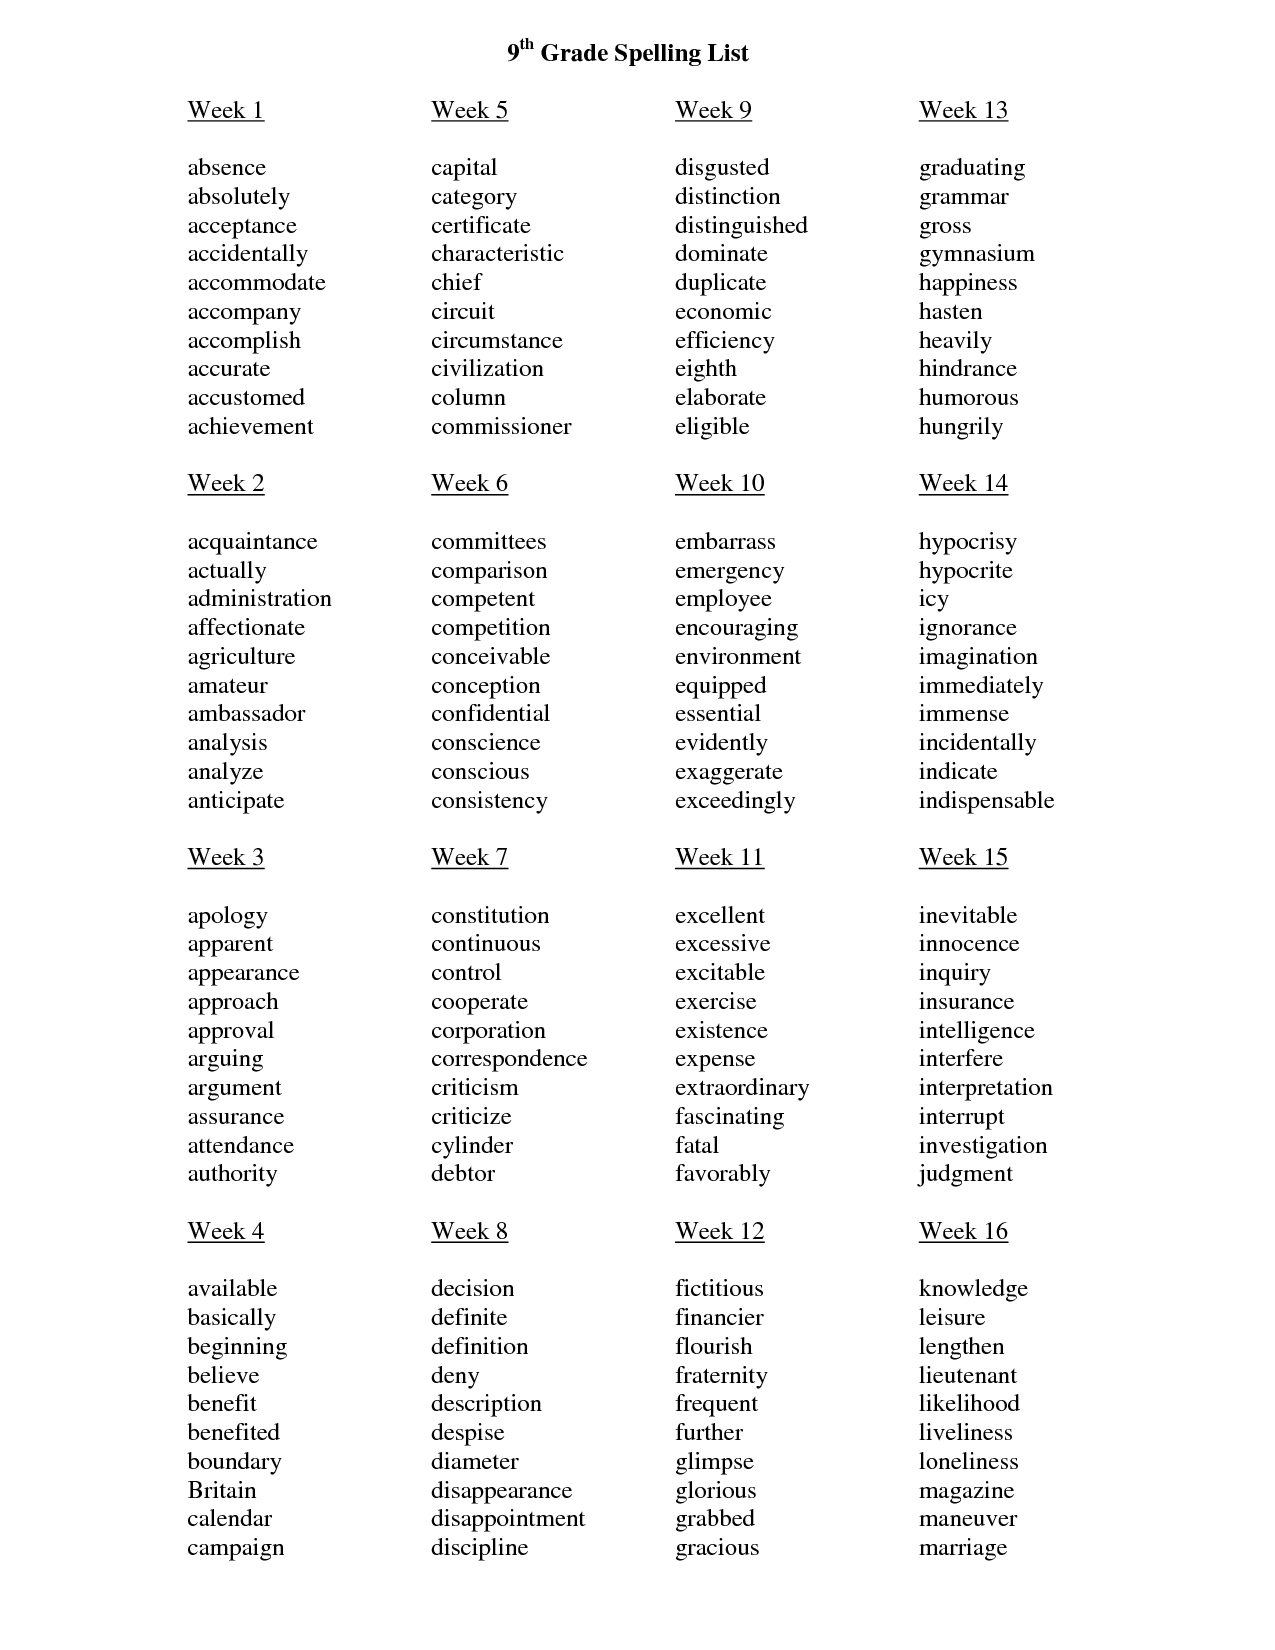 16-best-images-of-10th-grade-vocabulary-worksheets-10th-grade-math